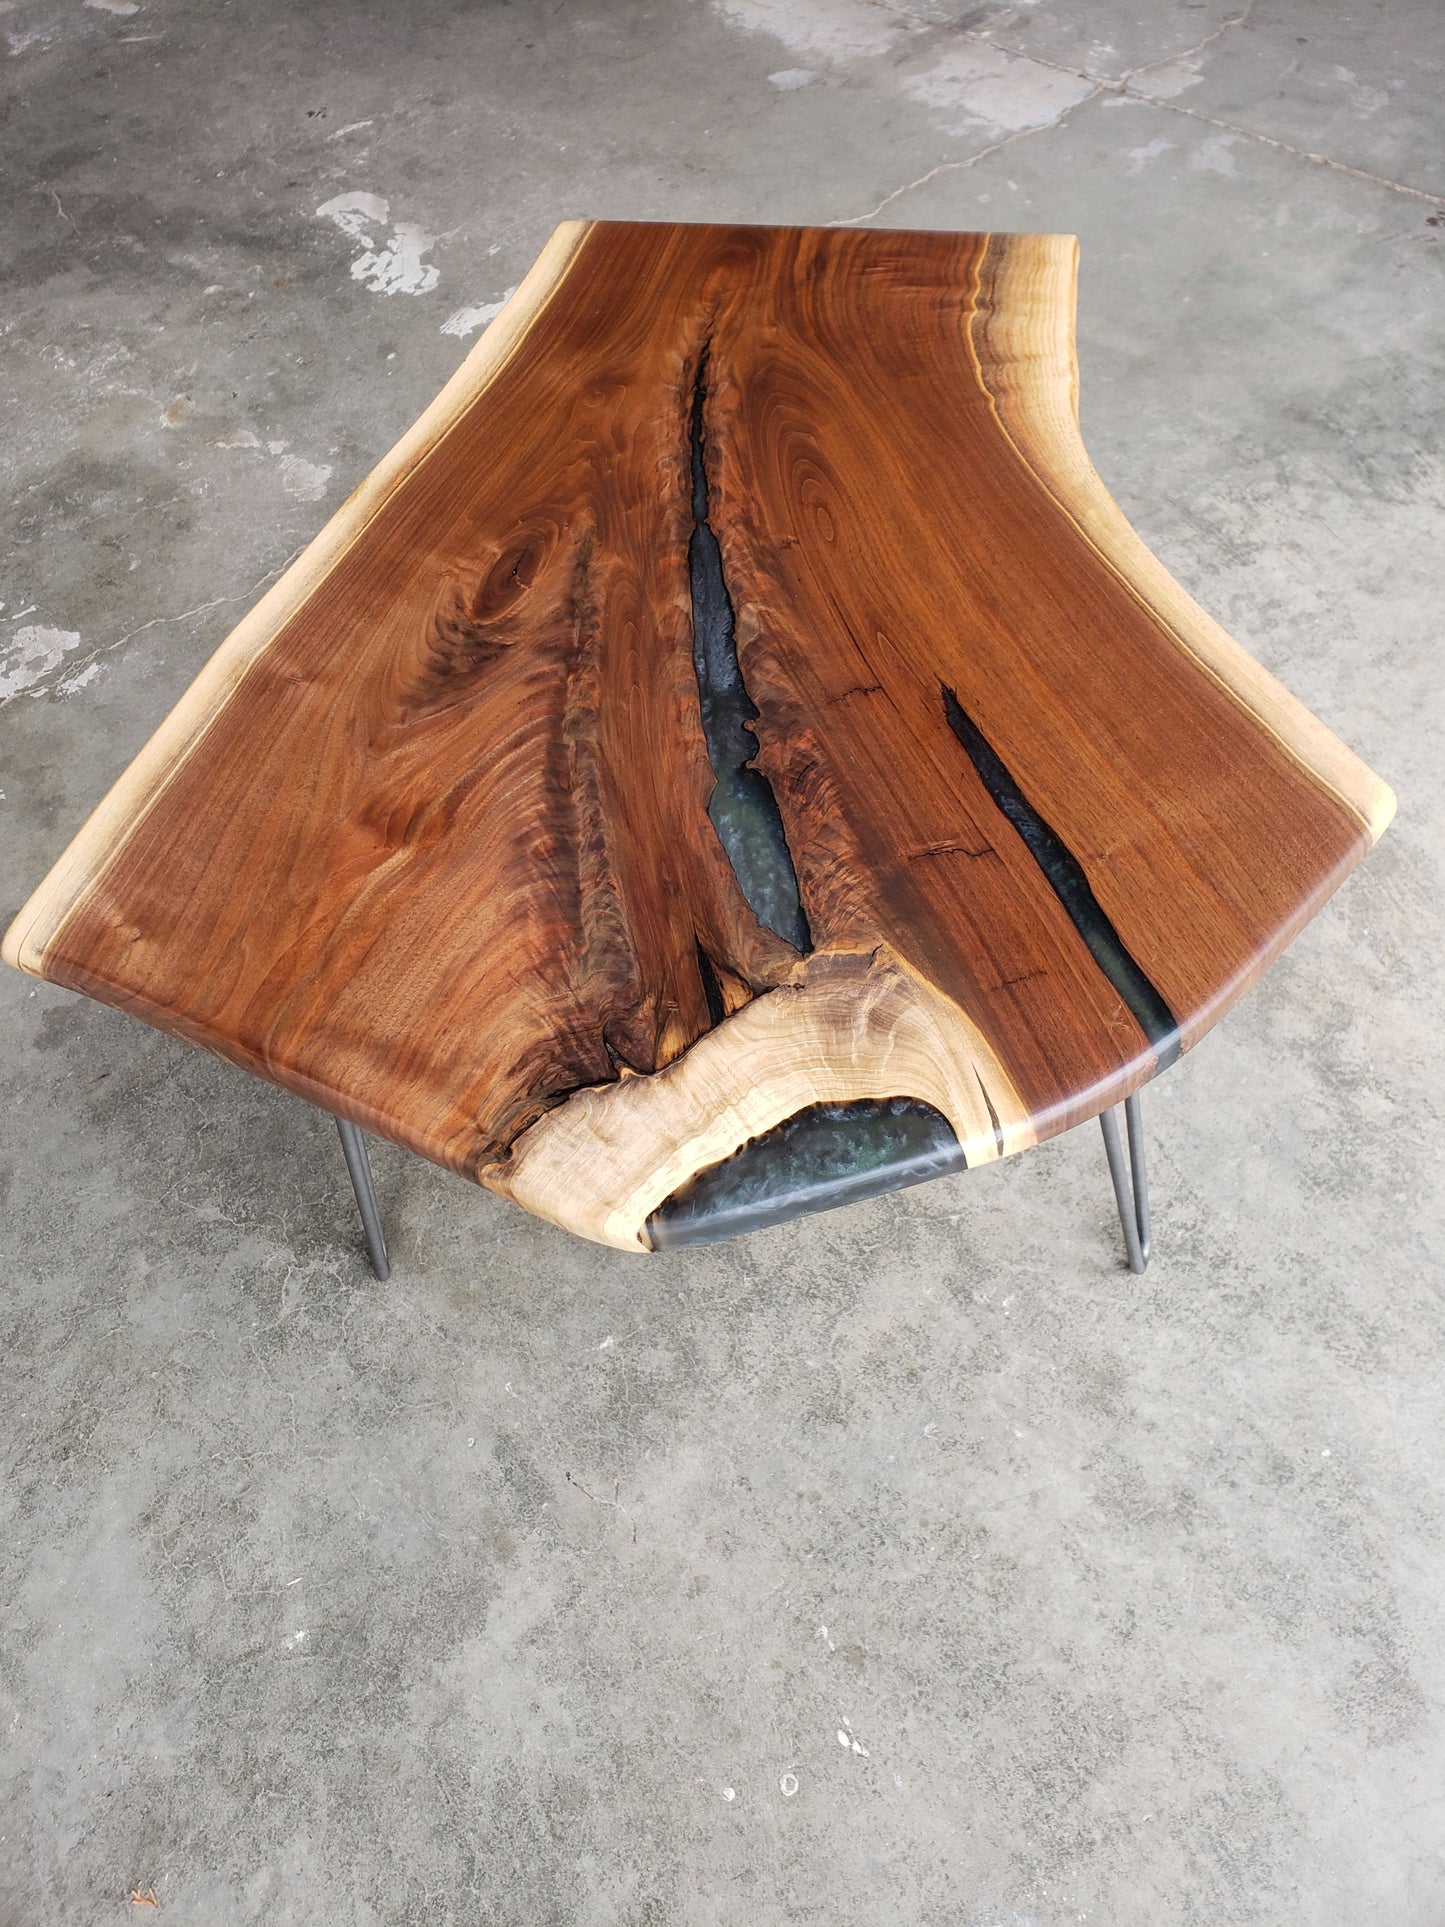 Live-Edge Black Walnut Side Table with Dolphin Grey Epoxy Resin Fills